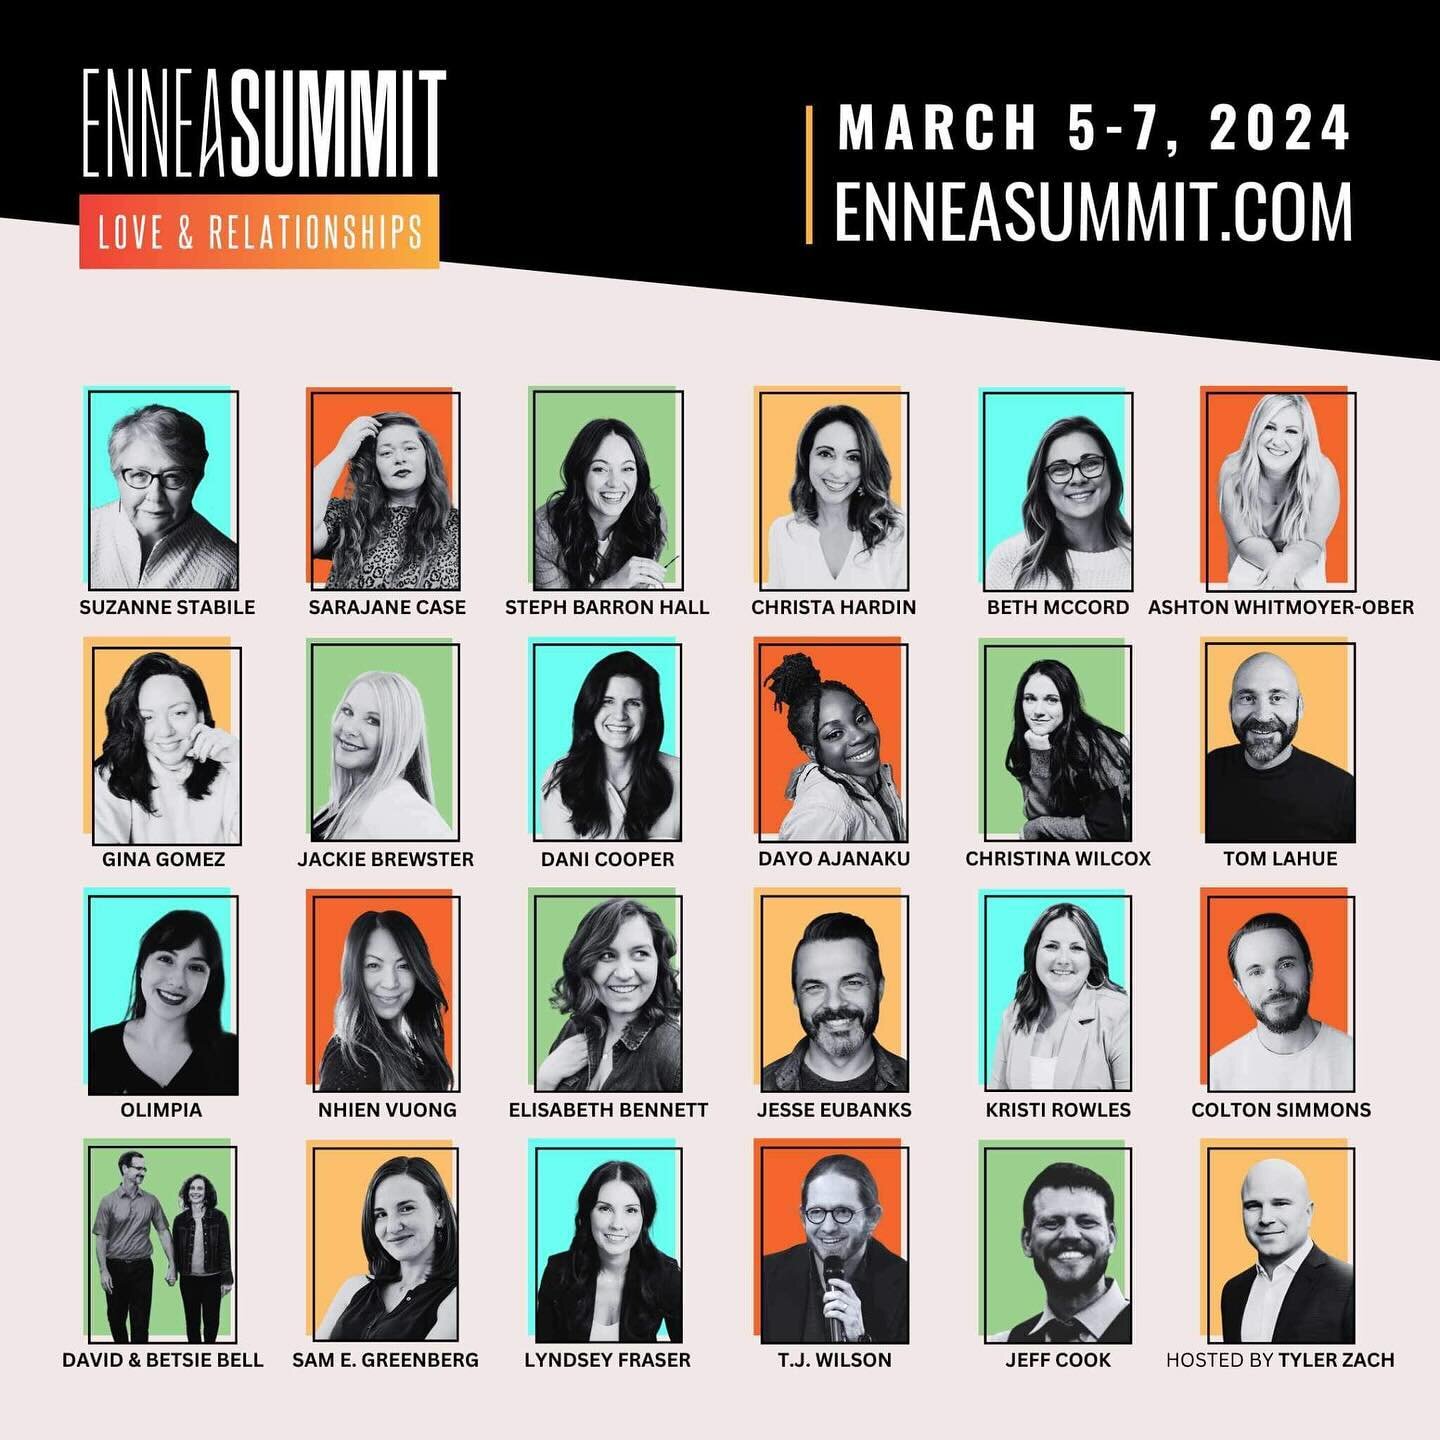 Oh hey, it&rsquo;s me and @lyndseyfraserlmft talking s*x and Enneagram instincts &amp; types on March 7 at the EnneaSummit on Love &amp; Relationships. 

Lots of amazing speakers on topics like dating, marriage, parenting, conflict styles, communicat